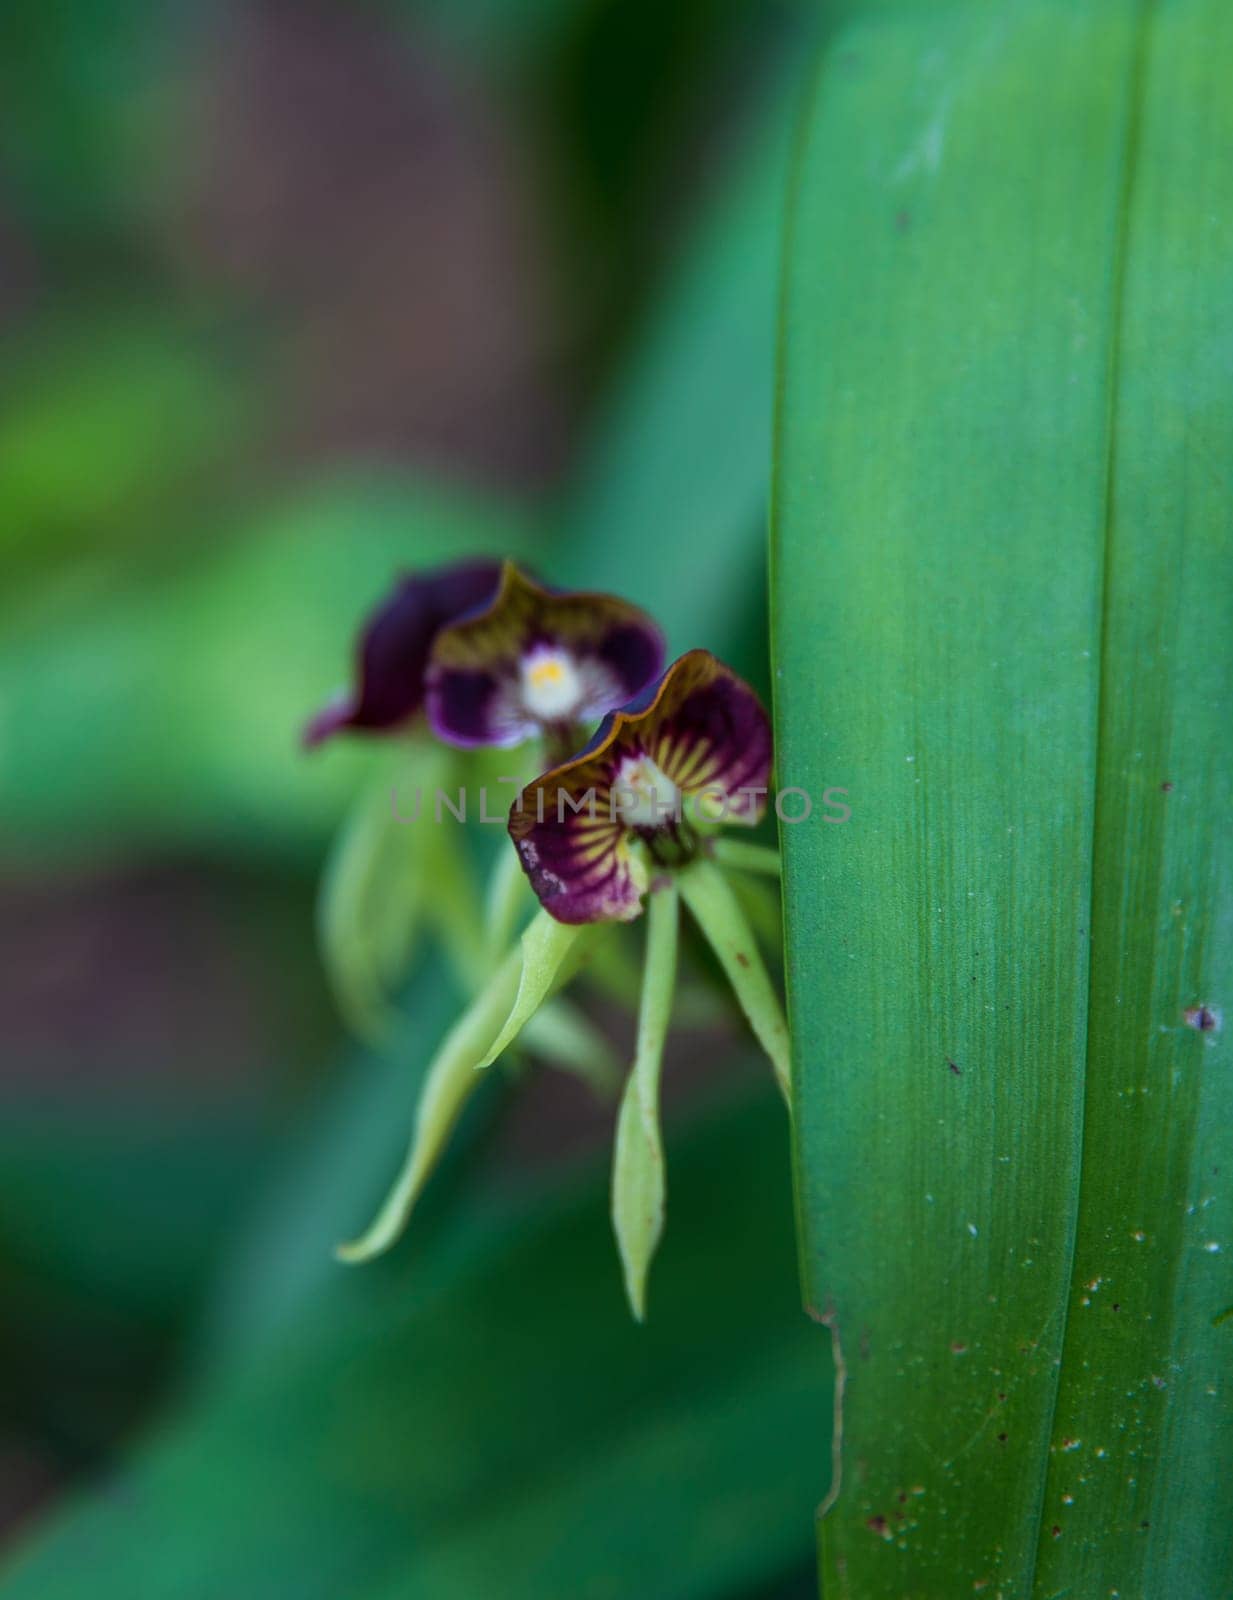 A black orchid peeking from behind the leaf